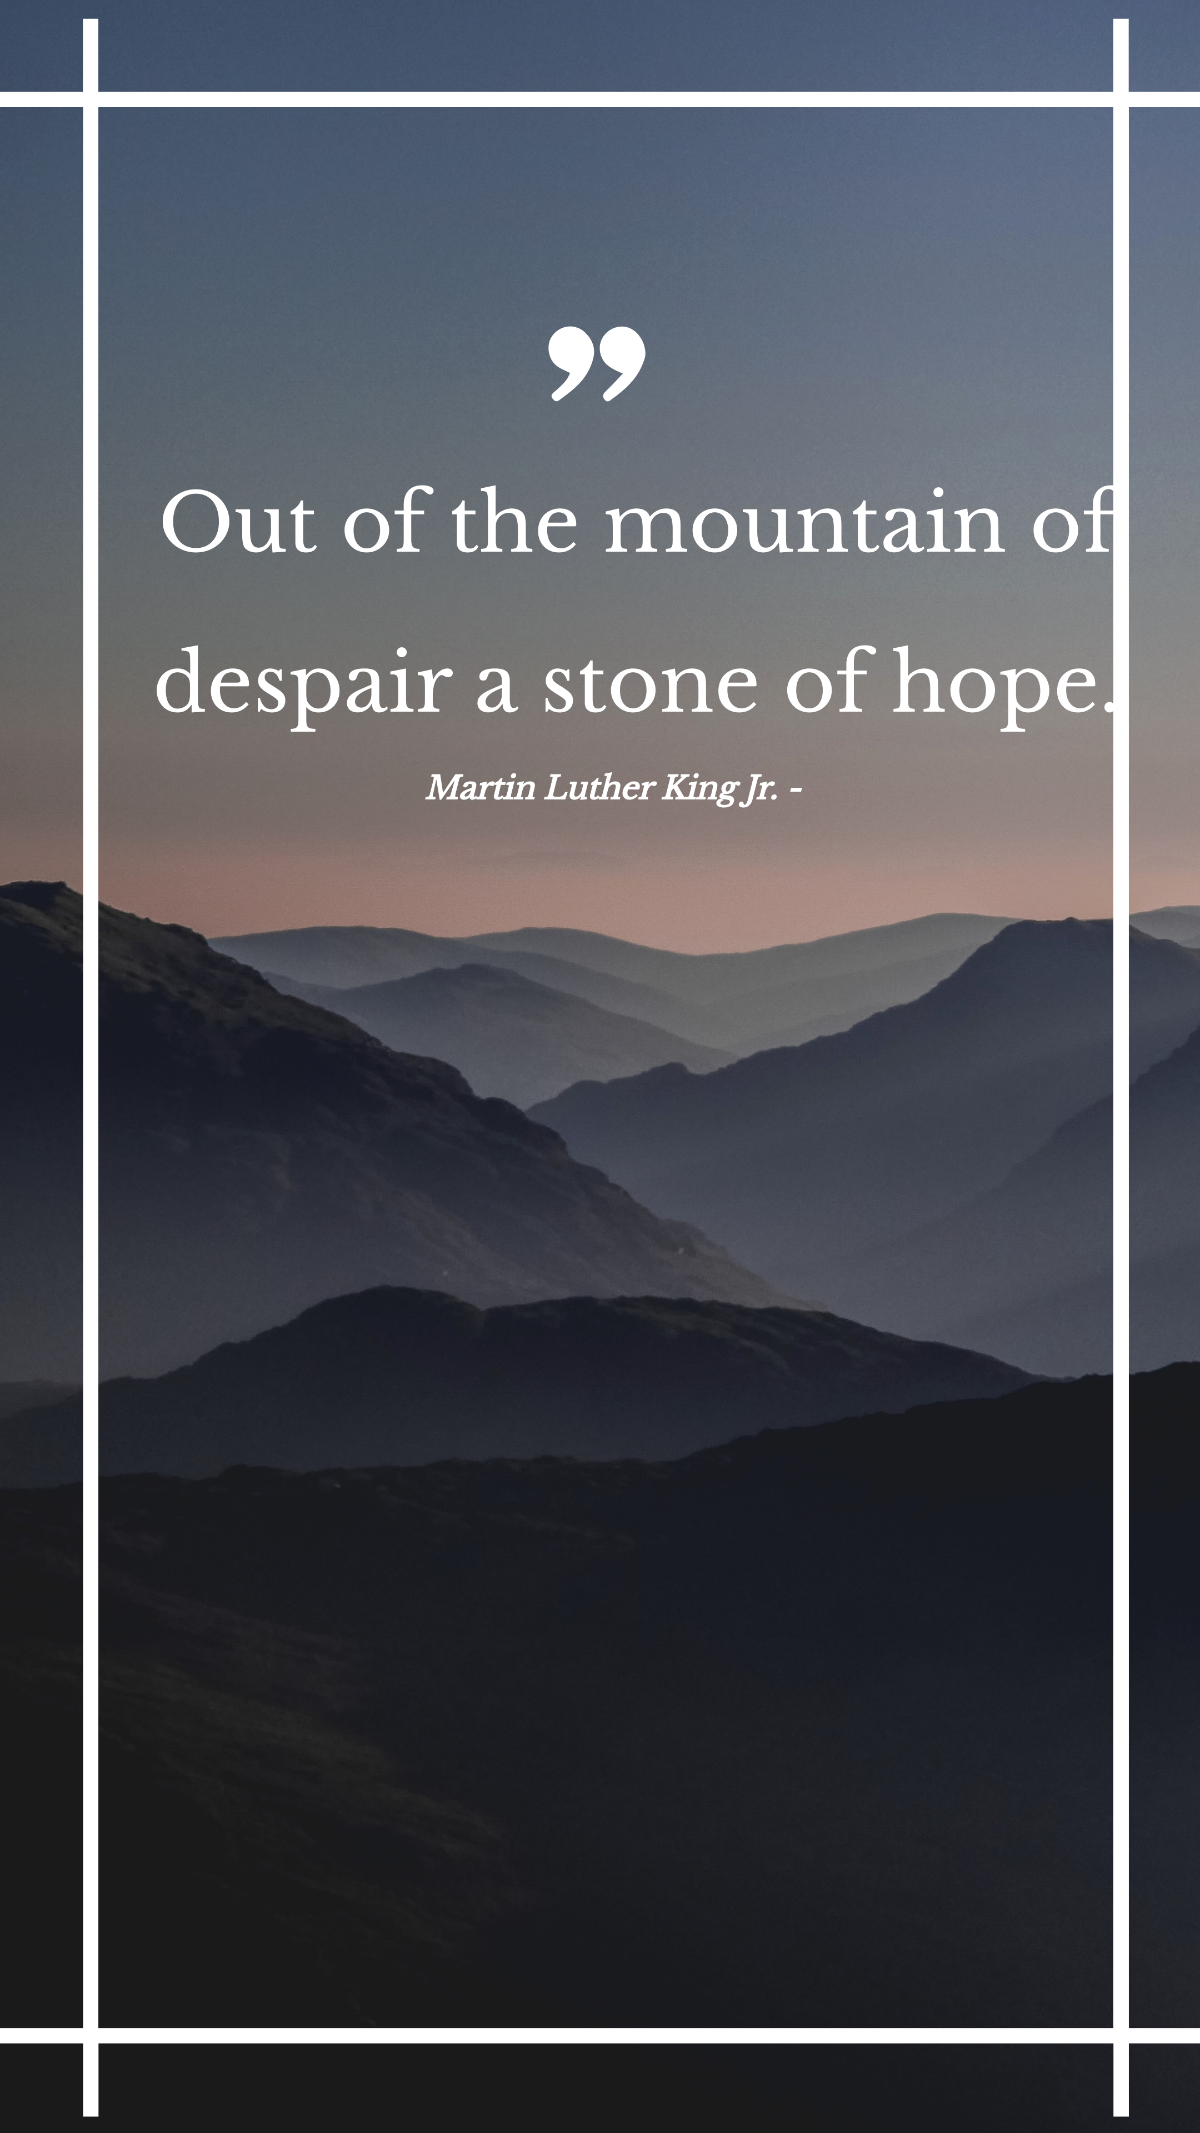 Martin Luther King Jr. - Out of the mountain of despair a stone of hope. Template